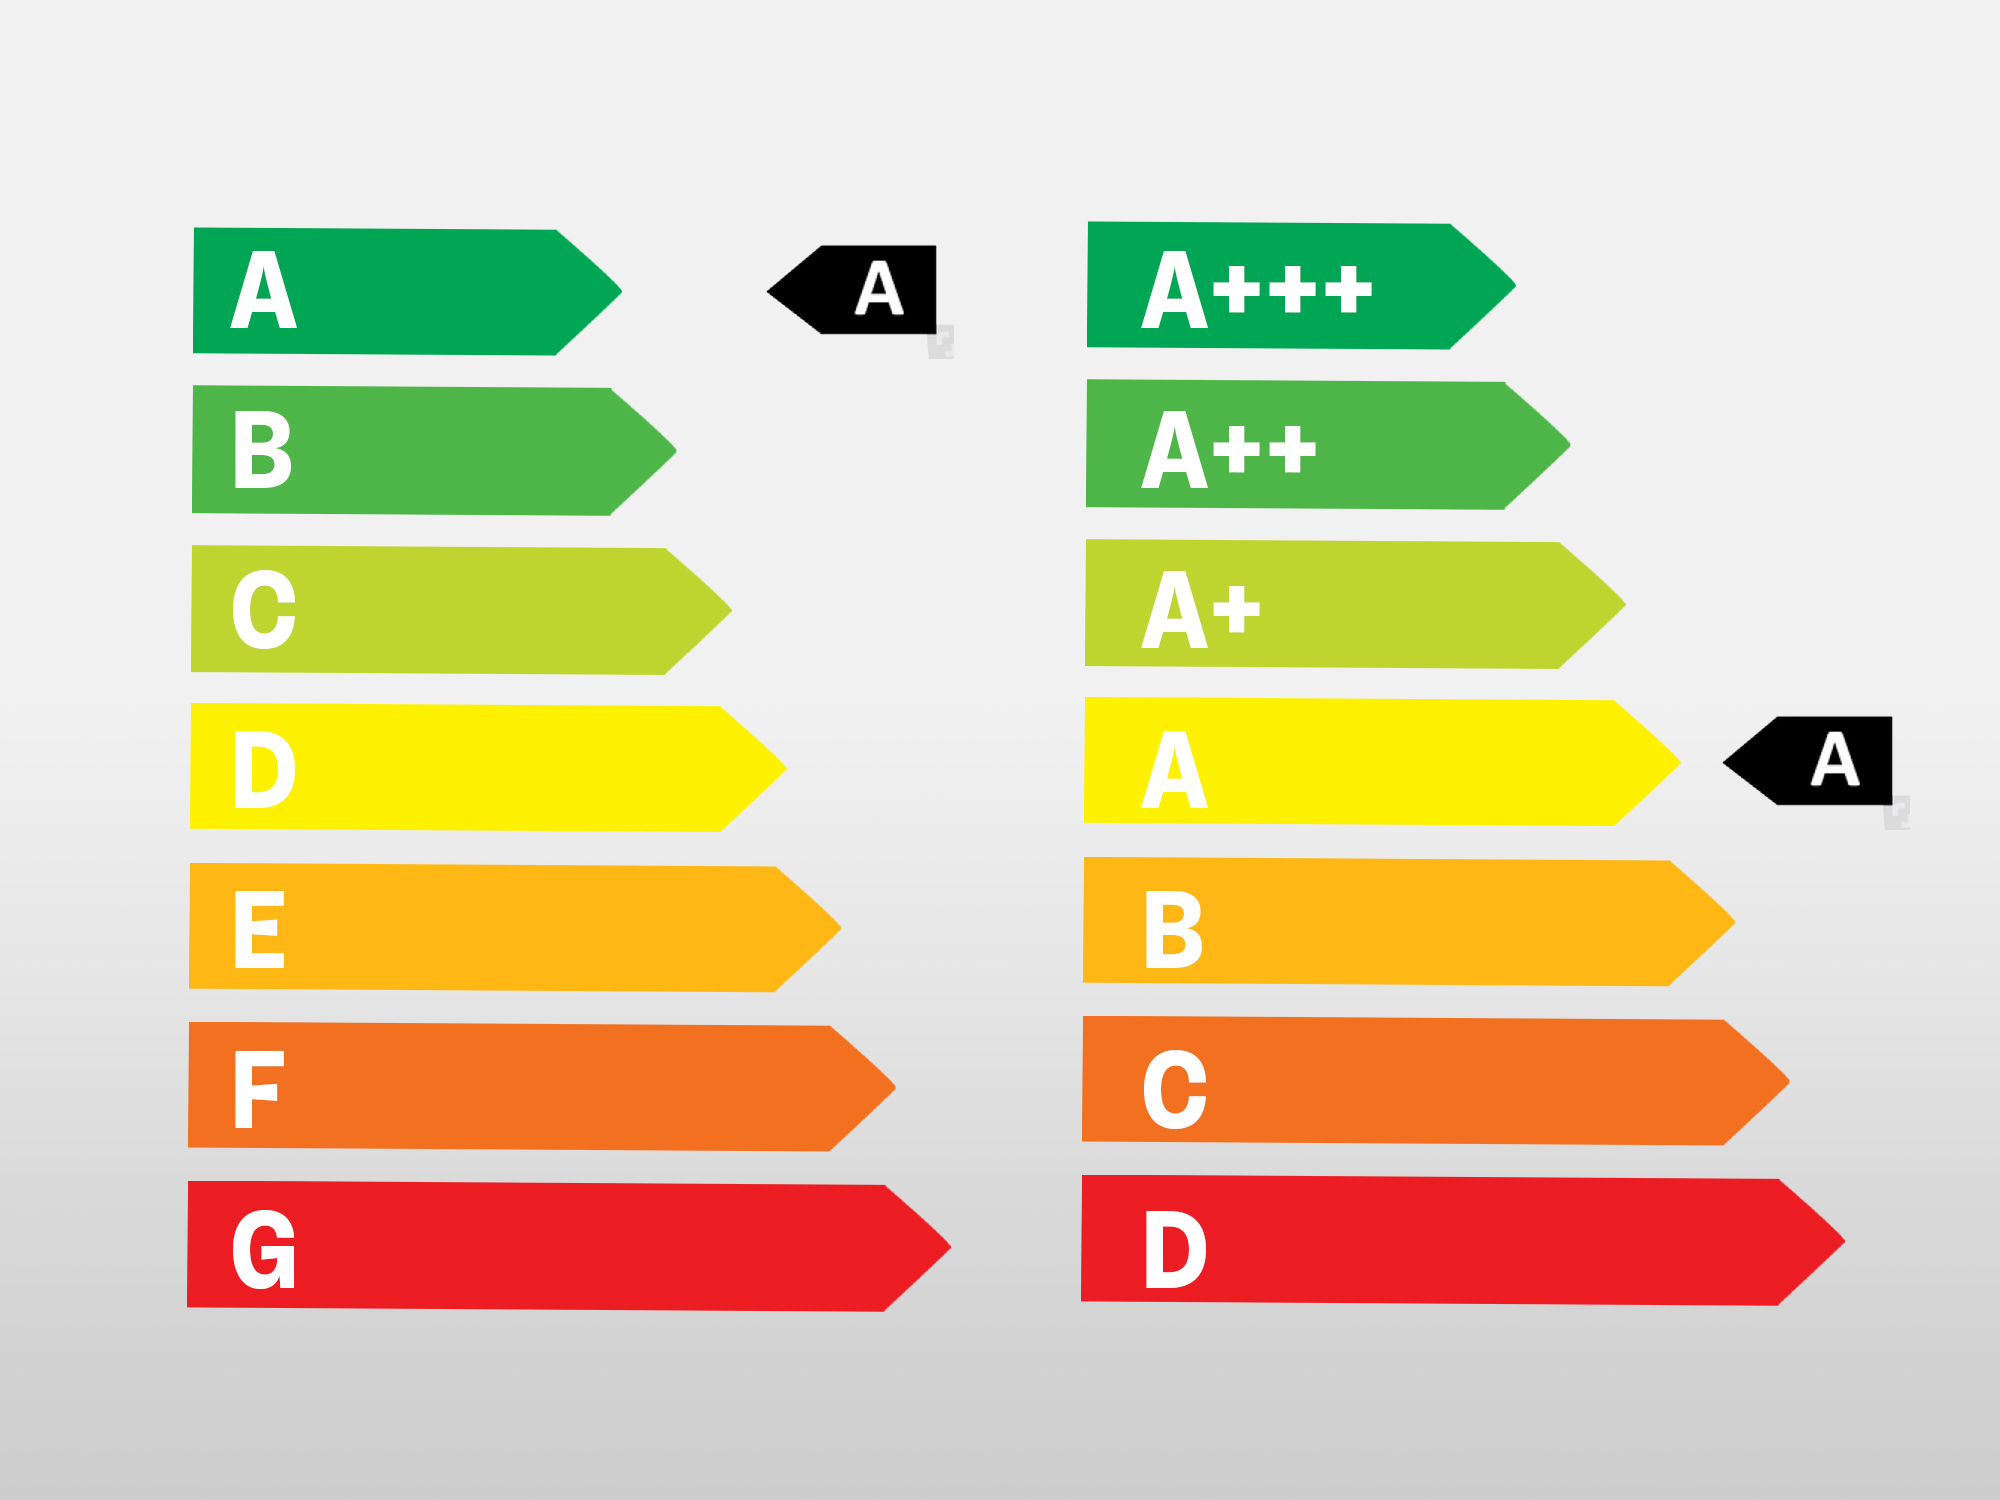 Appliance Star Rating Labels Explained - Gambaran